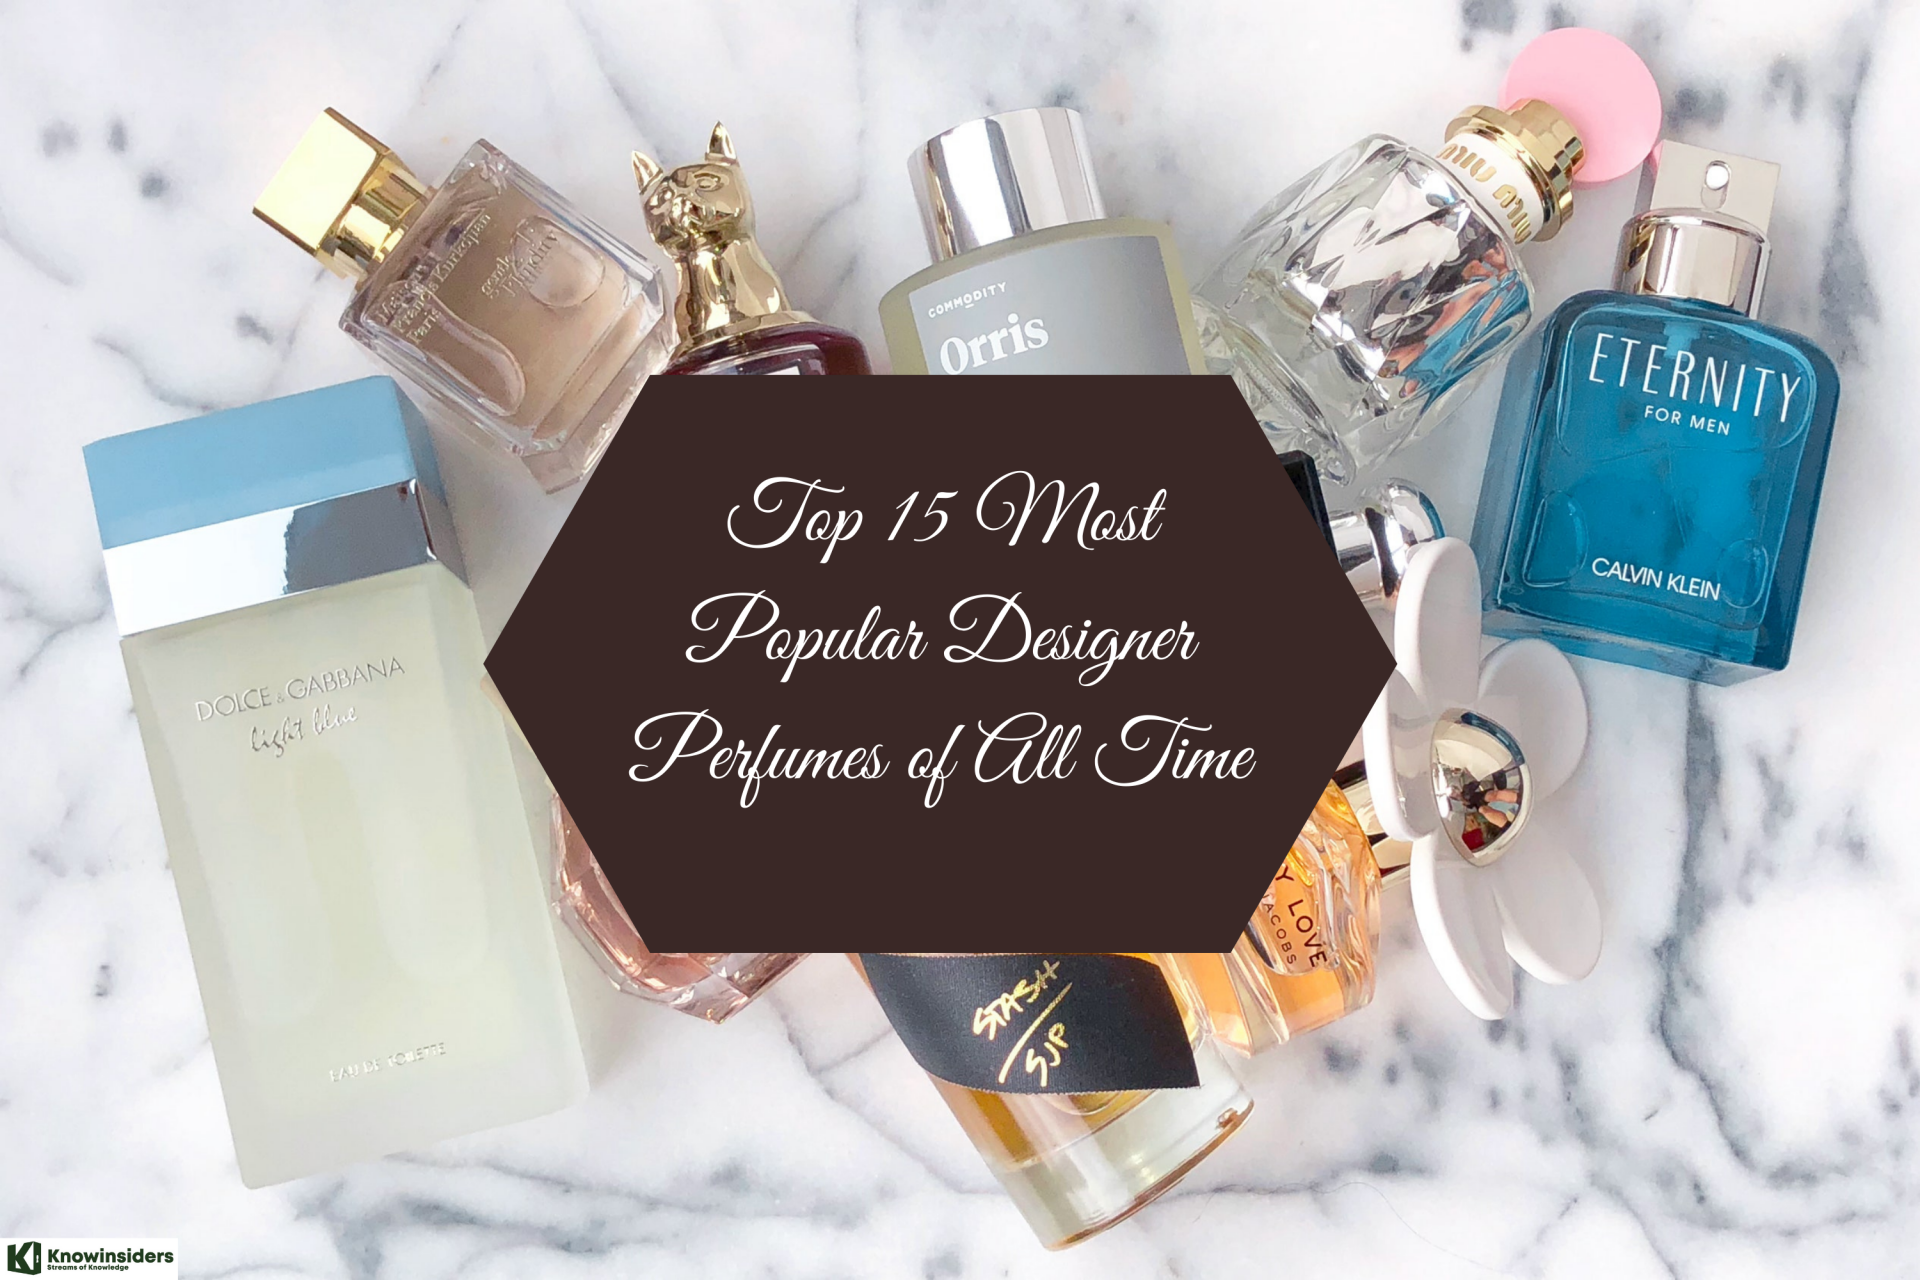 Top 15 Most Popular Designer Perfumes of All Time. Photo: KnowInsiders